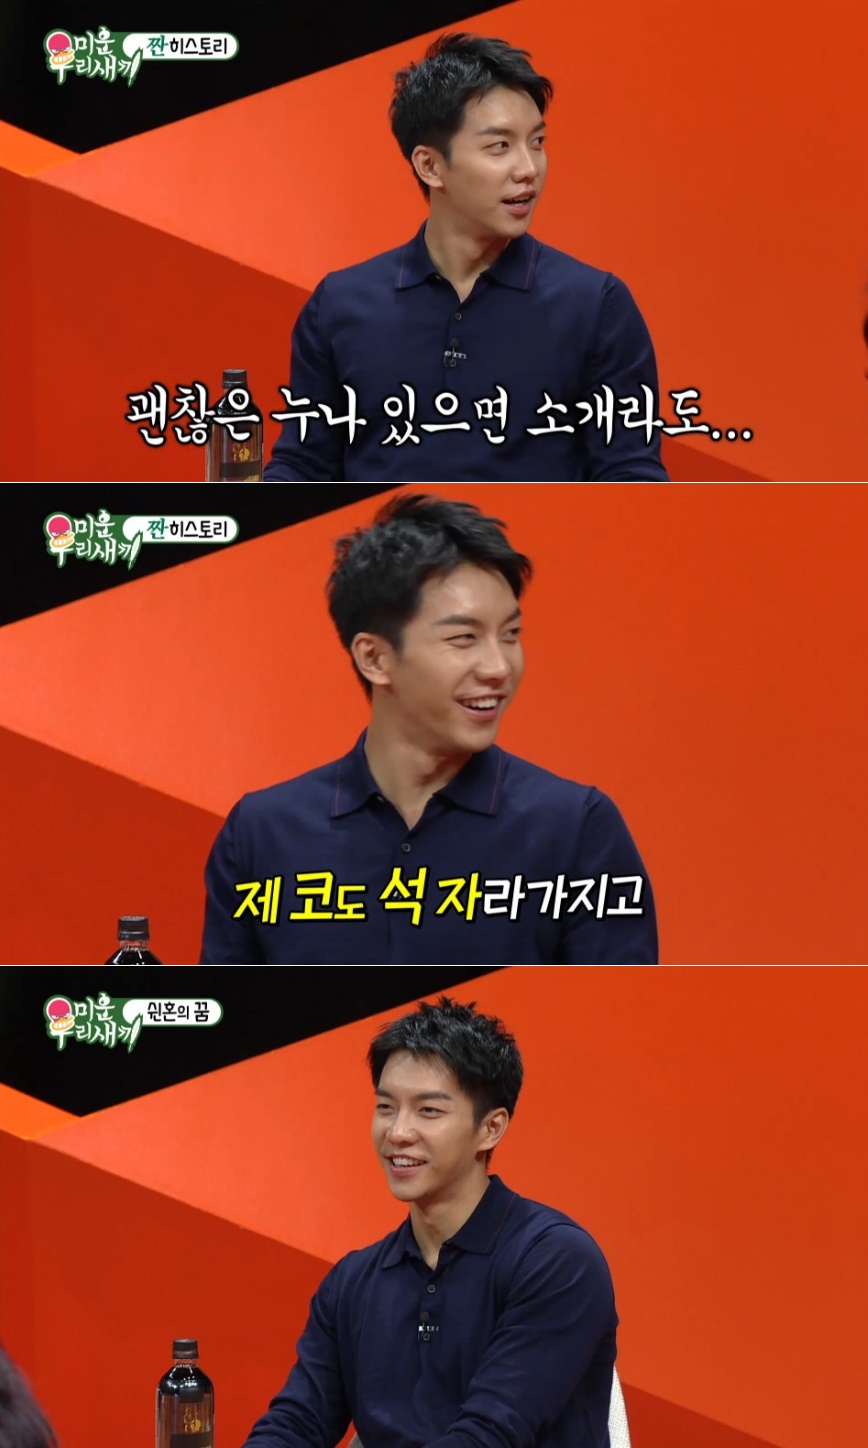 Actor Lee Seung-gi has confessed to the grievances he has hidden.Lee Seung-gi appeared as a special guest on SBS My Little Old Boy broadcast on September 2.Lee Seung-gi, who made his debut with his first full-length album Dream of Moth in 2004, is also active in various fields such as acting as well as his main singer activity this year, which entered his 15th year of debut.Since recently, he has appeared on SBS Death Masters Uniform and has been showing off his rusty artistic sense.The Movengers, composed of singer Kim Gun-mo, Kim Jong-kook, and Tony Ahns mother, smiled brightly in the appearance of Lee Seung-gi, one of the ideal types of all people.Movengers continued to praise I want to be my youngest son and I am handsome, and Lee Seung-gi smiled at me with a smile.MC Seo Jang-hoon asked the Movengers, How does the victory look good when it plays, sings, and performs?Kim Jong-kooks mother said, Its time to sing, and Kim Gun-mos mother said, I liked it best when I played.Ive never heard much of Lee Seung-gi singing, Im going to have to sing a lot, he added.Lee Seung-gi said, I think I received 200 questions, but I only had two answers. I do not know where to answer.I think I will come out like a child who can not speak today. Lee Seung-gi, one of the most popular entertainers, is a popular star, but his troubles were not much different from his peers.I am worried that I have been worried about my love from my worries about love to my worries about my appearance.MC Shin Dong-yup said to Lee Seung-gi, If you have a good sister, please introduce me to Im Won-hee, while watching actor Im Won-hee reveal his Dolsingnam grievance on the monitor screen.Lee Seung-gi said, I wish I had it, but now my nose is stone.MC Seo Jang-hoon said, In the harbor, Lee Seung-gi is a good owner to avoid war.I dont think theres a big bend, so I think were talking about it, Lee Seung-gi said.The Face Reader is good, Tony Ahns mother revealed of Lee Seung-gis The Face Reader.Seo Jang-hoon asked, Is there anything you think is perfect, but I do not like it here?Lee Seung-gi replied: When youre shown on TV, you want to look sharp and be as smart as a nose cut; you want to look lean and yes.hwang hye-jin